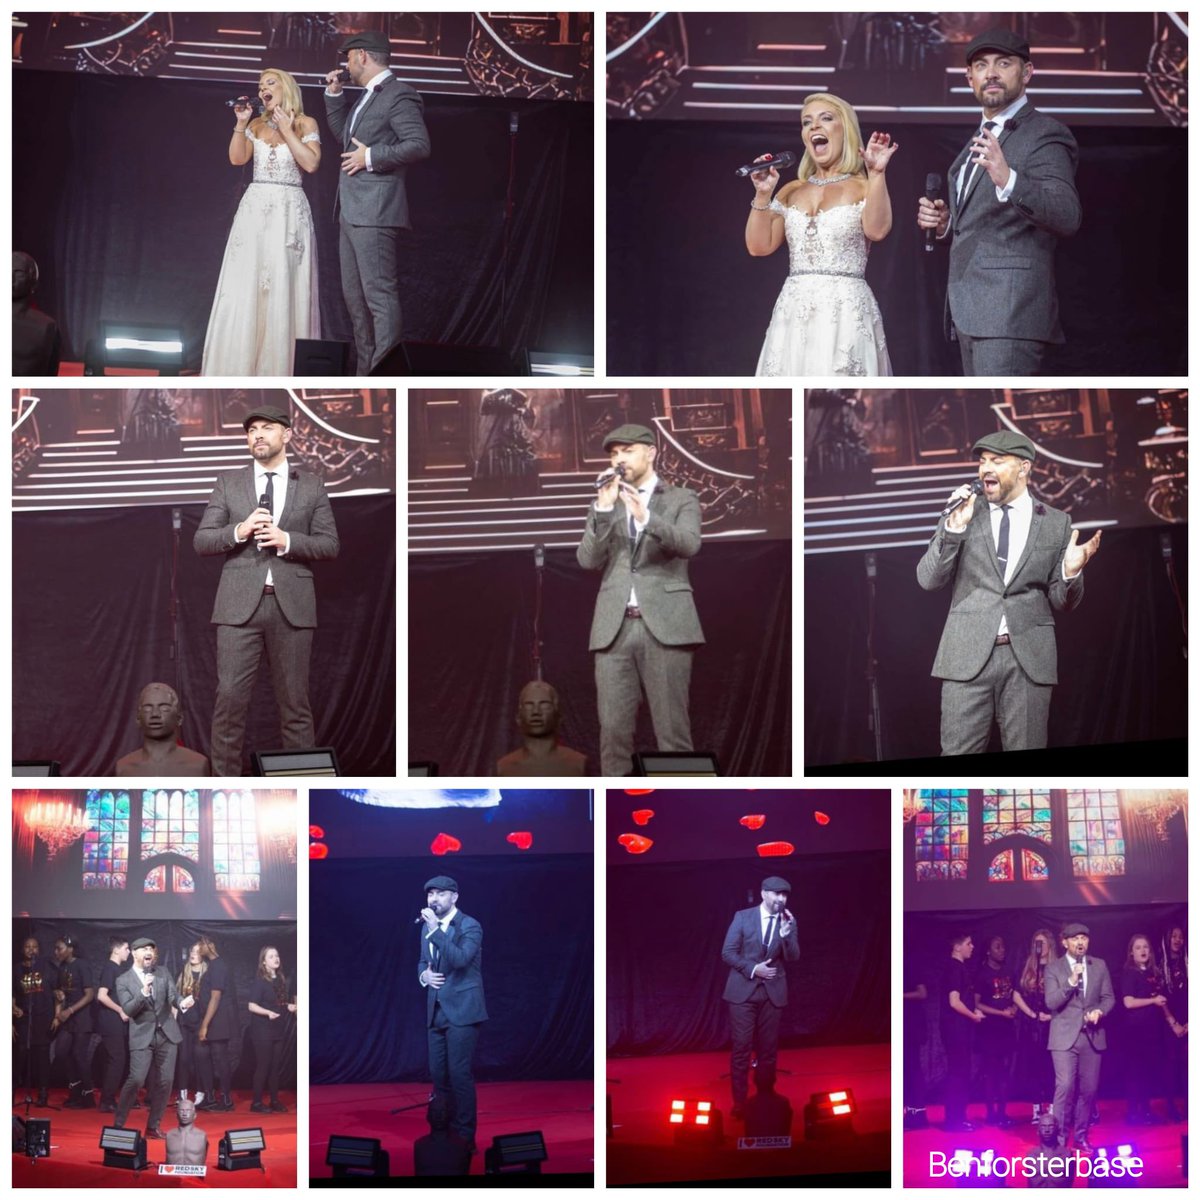 Some more great photos of @thebenforster performing at the recent @redskycharity ball. Photo credit: Red Sky Foundation Facebook Page